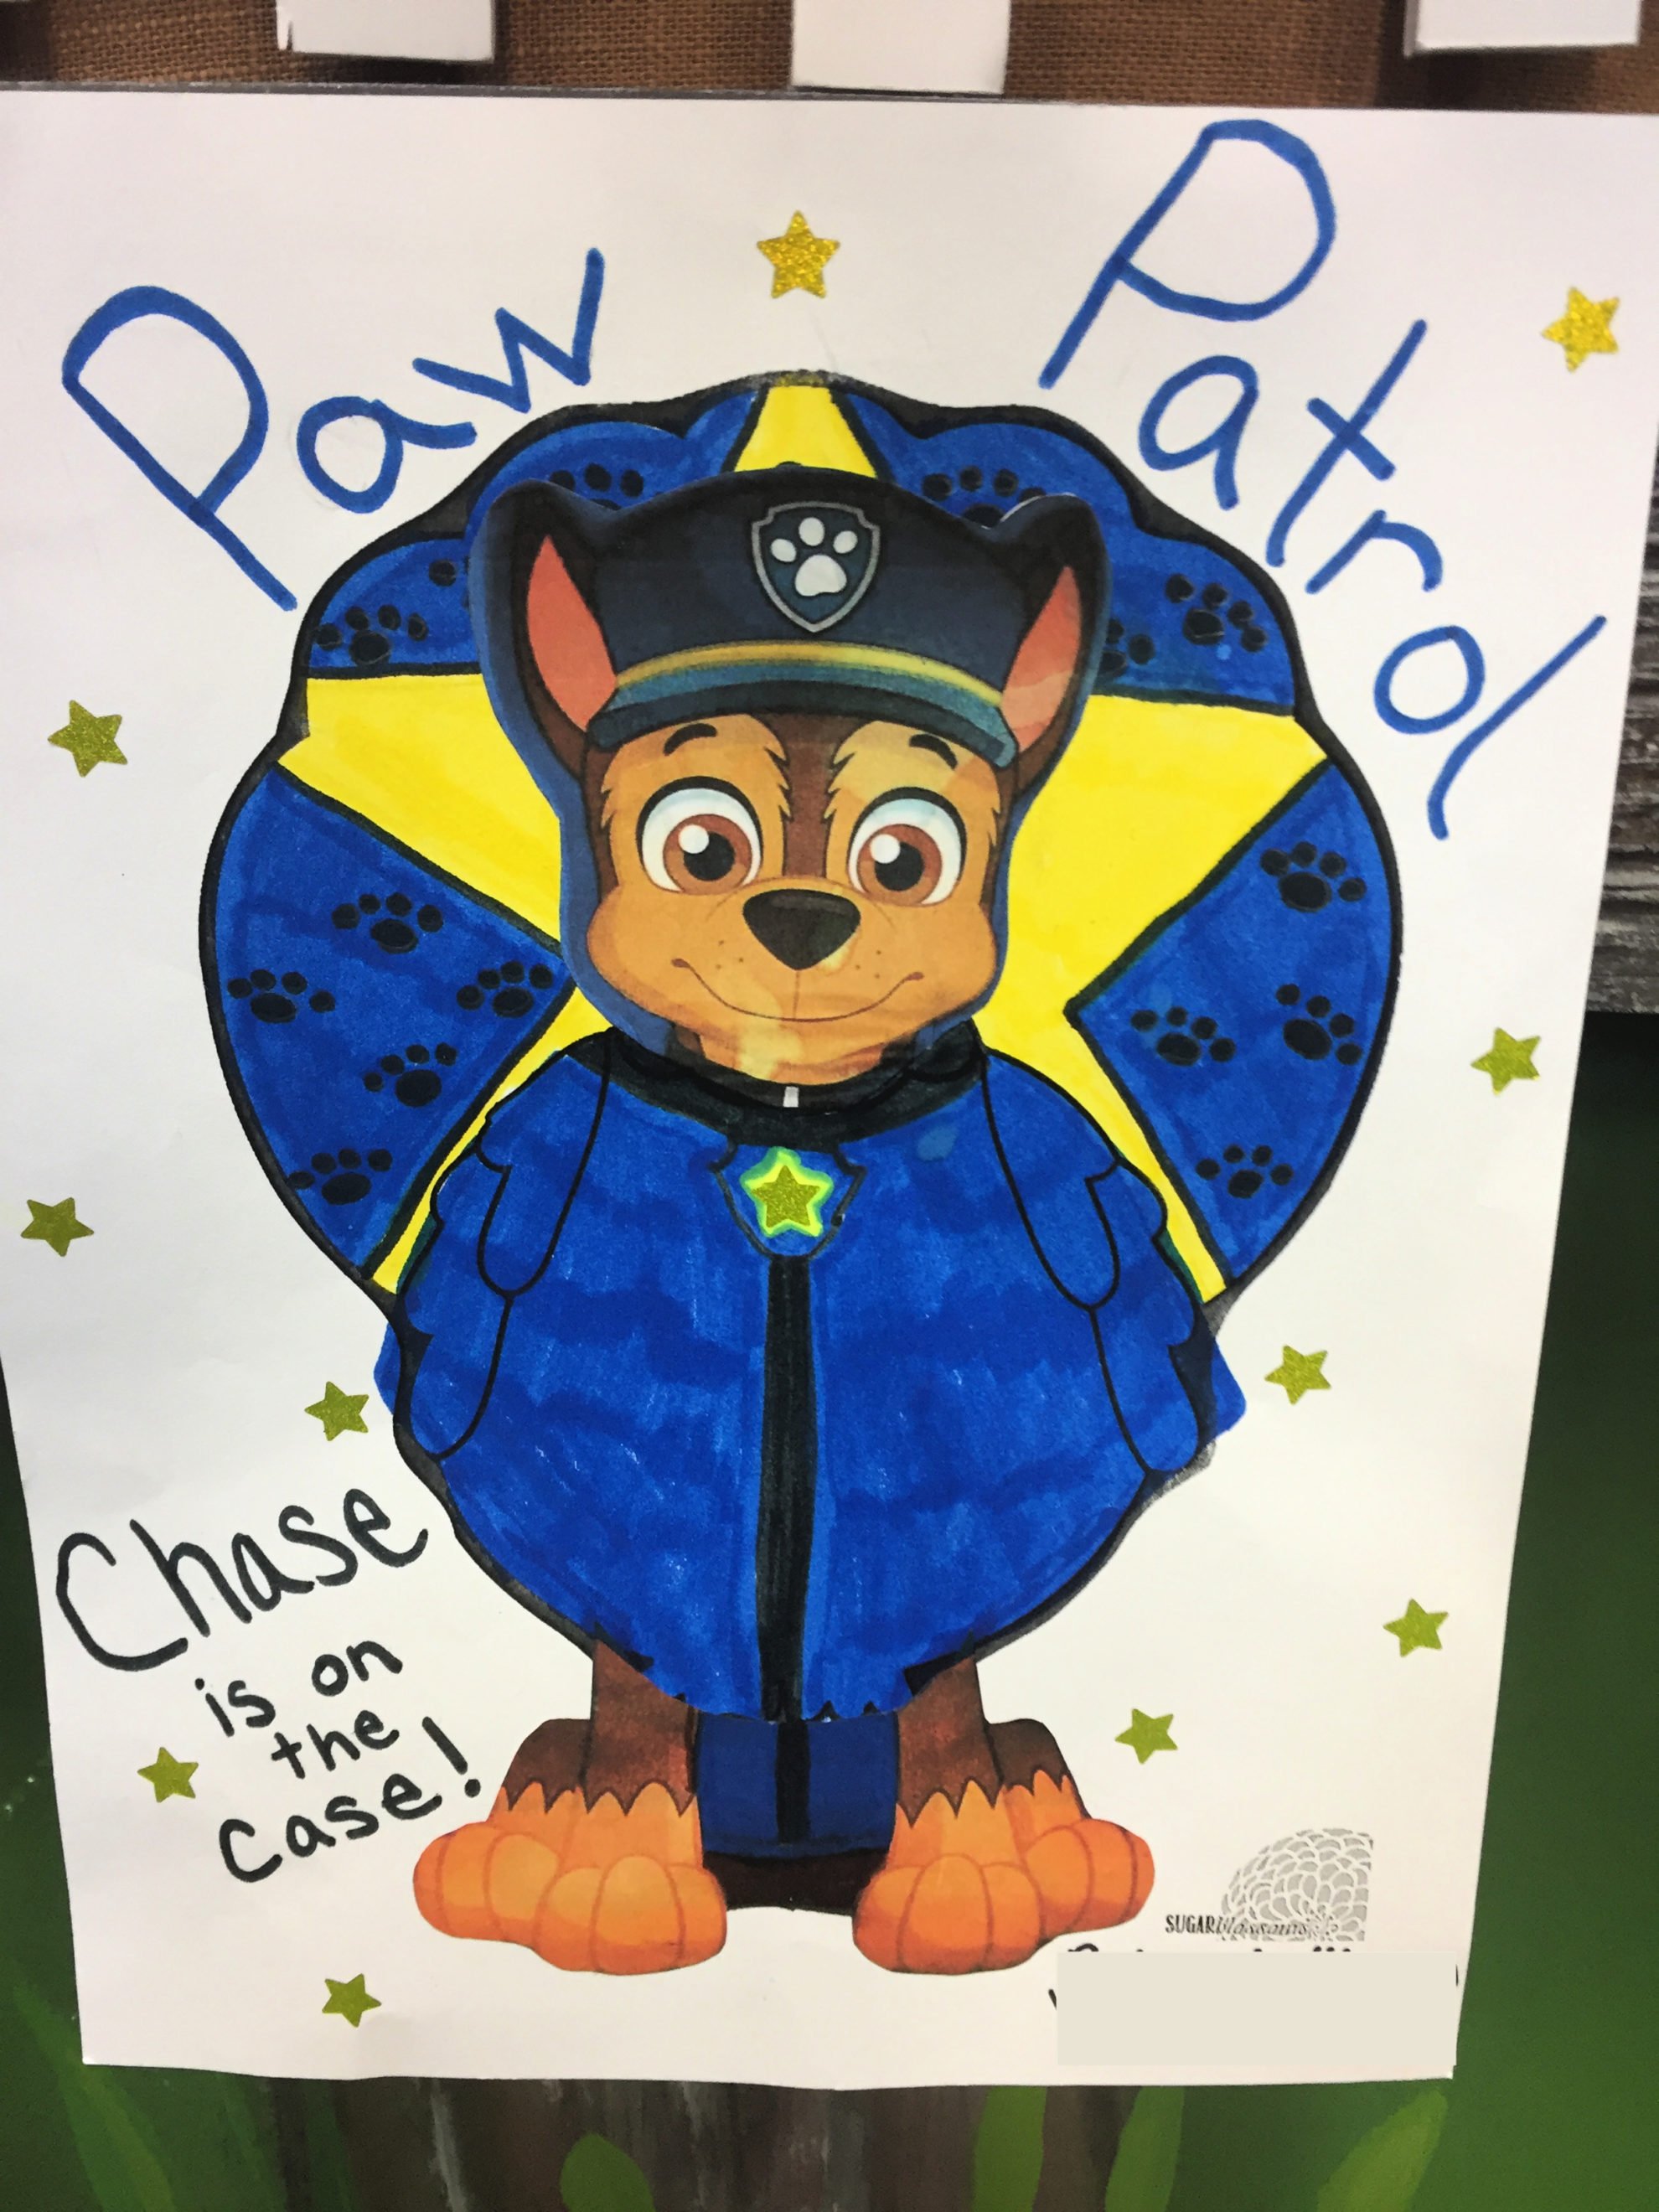 Chase from Paw Patrol dressed as a Turkey In Disguise with the words "paw patrol" written on top.